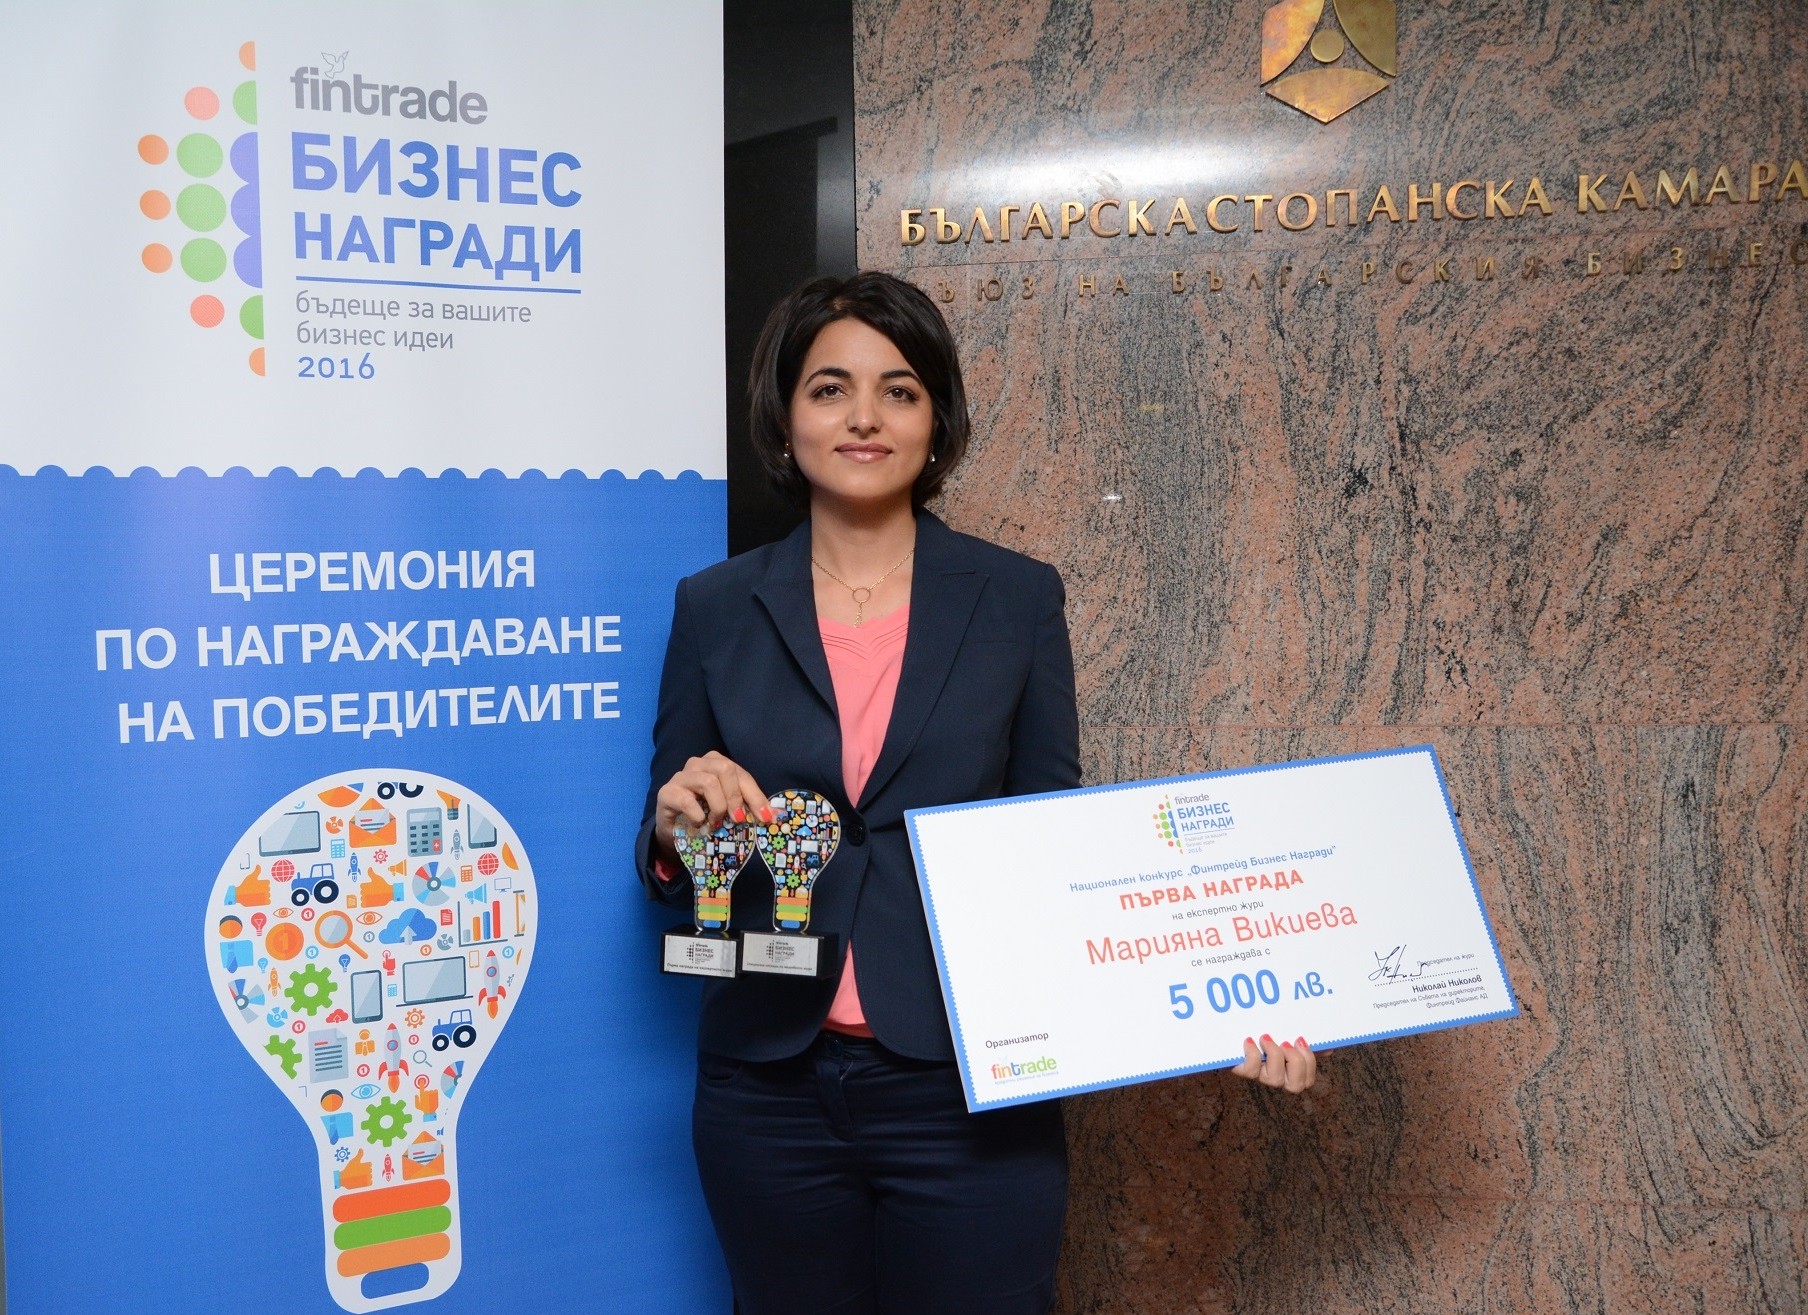 “Meli M” took the big prize of the first Fintrade Business Awards